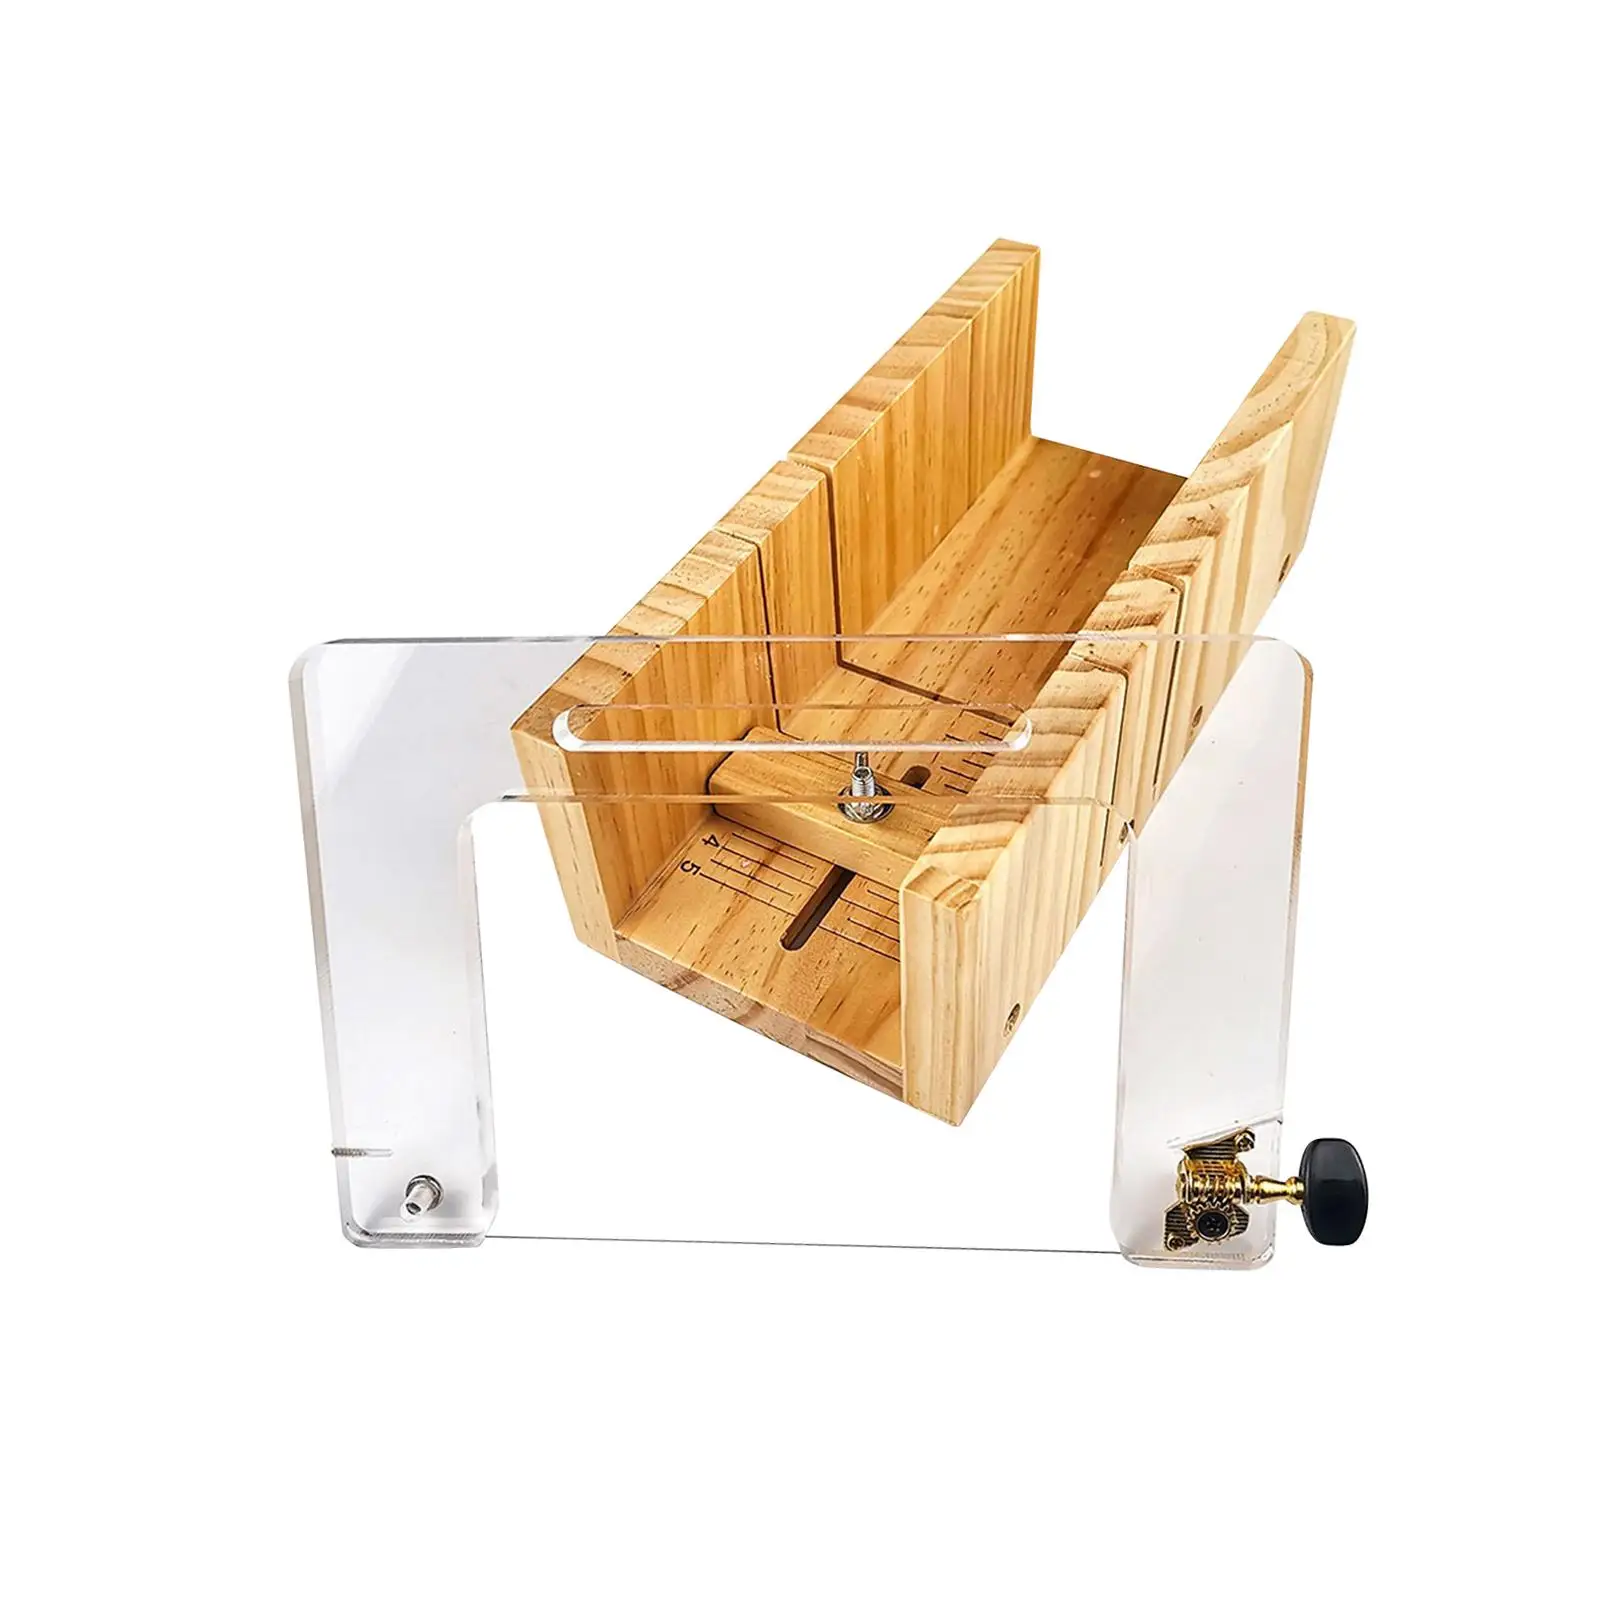 Soap Cutter Wood Soap Mold Adjustable with Size Scale Multifunctional Soap Slicer Tool Cutting Tool for Handmade Soap Bread